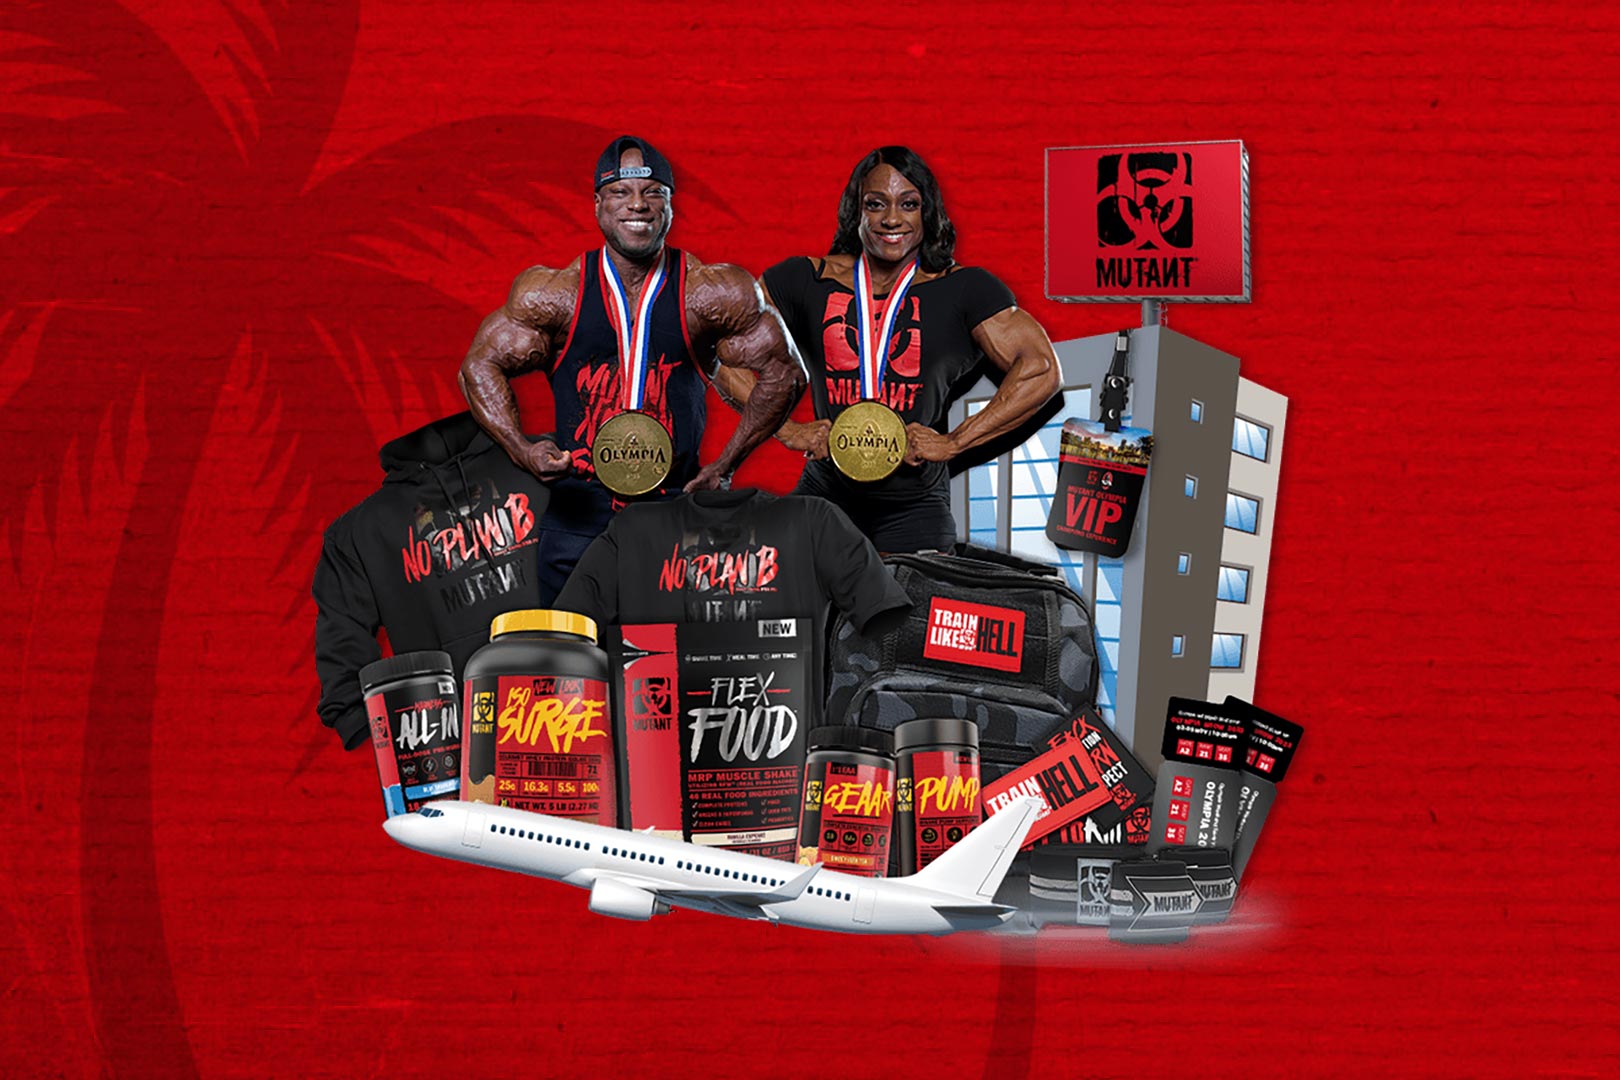 Mutant olympia champions experience giveaway